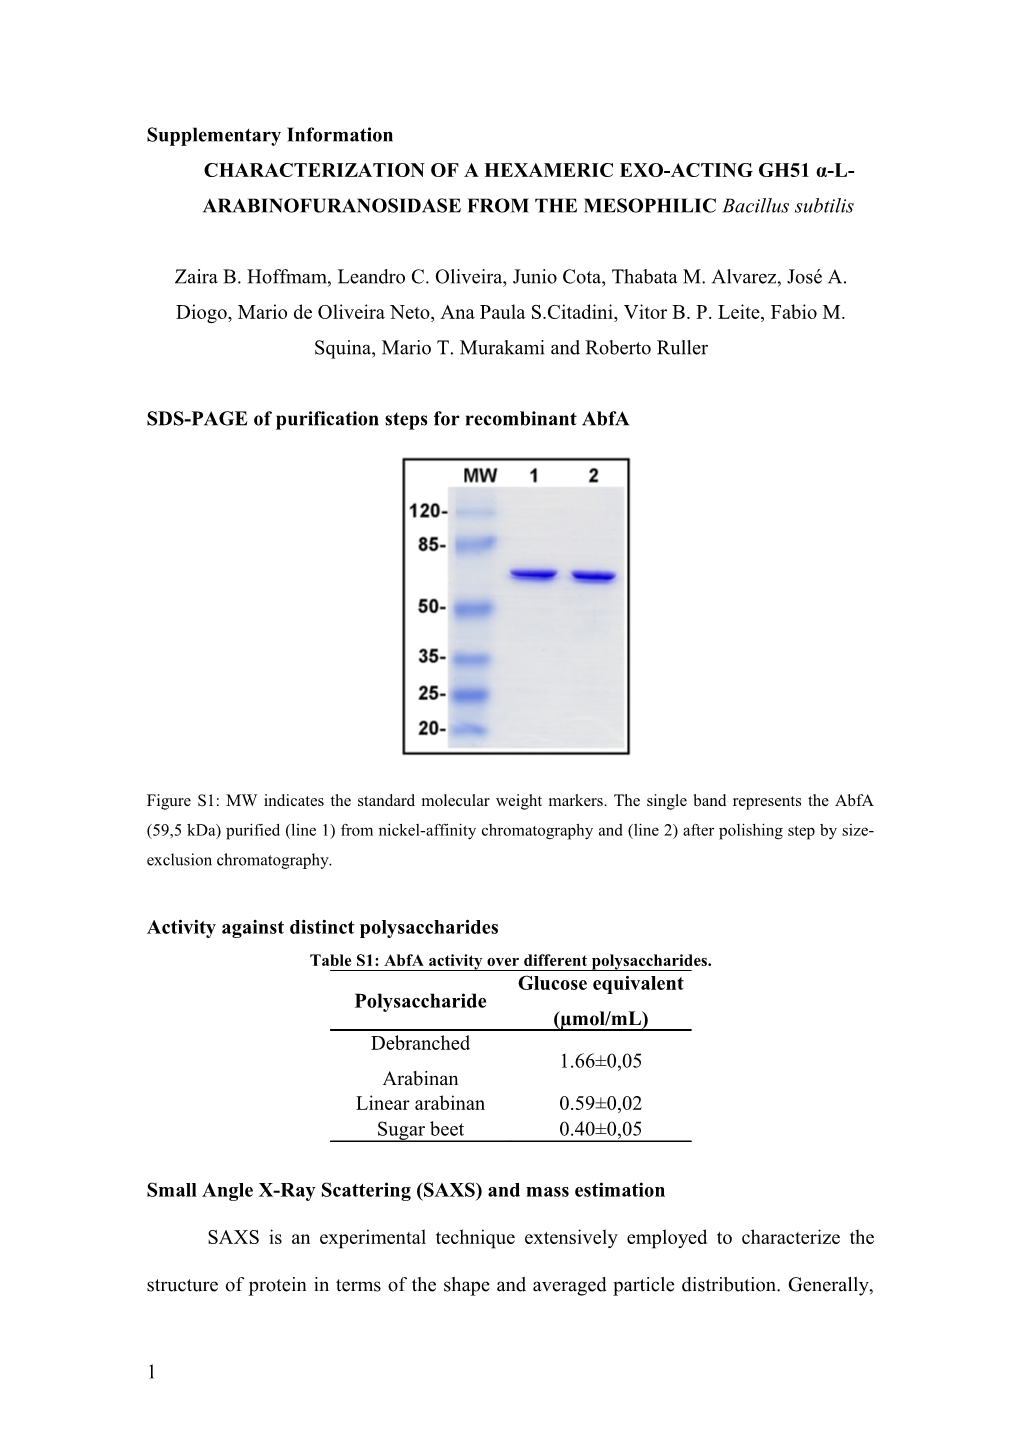 SDS-PAGE of Purification Steps for Recombinant Abfa